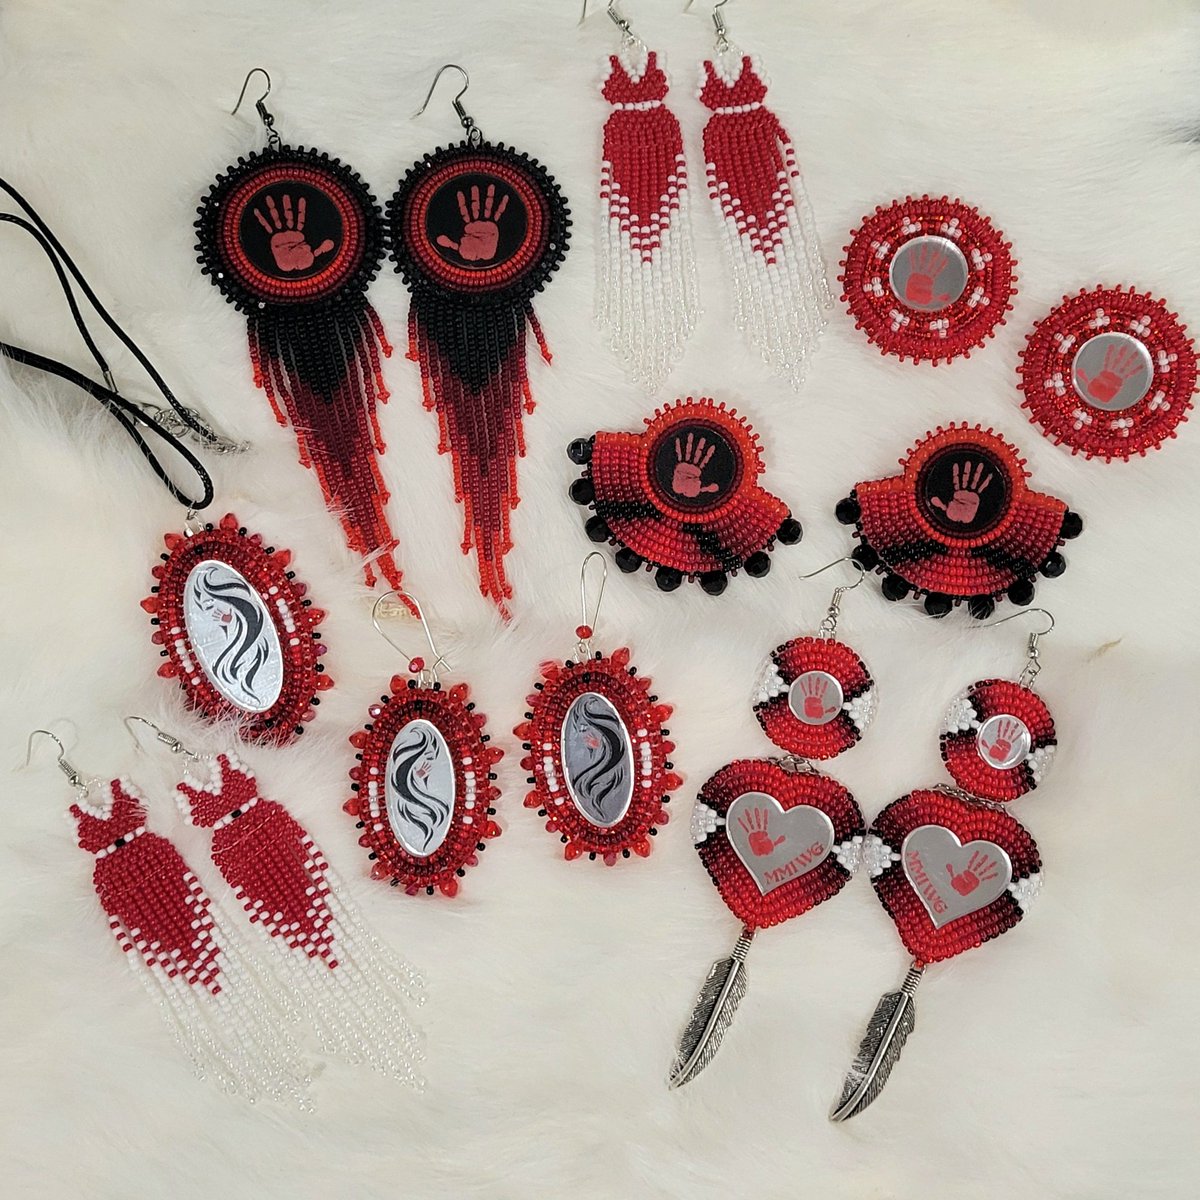 Here is the full MMIW collection! It is available now on my website. 20% of all purchases will be donated to the Native Women's Association of Canada ❤️ celdzinbeadwork.com